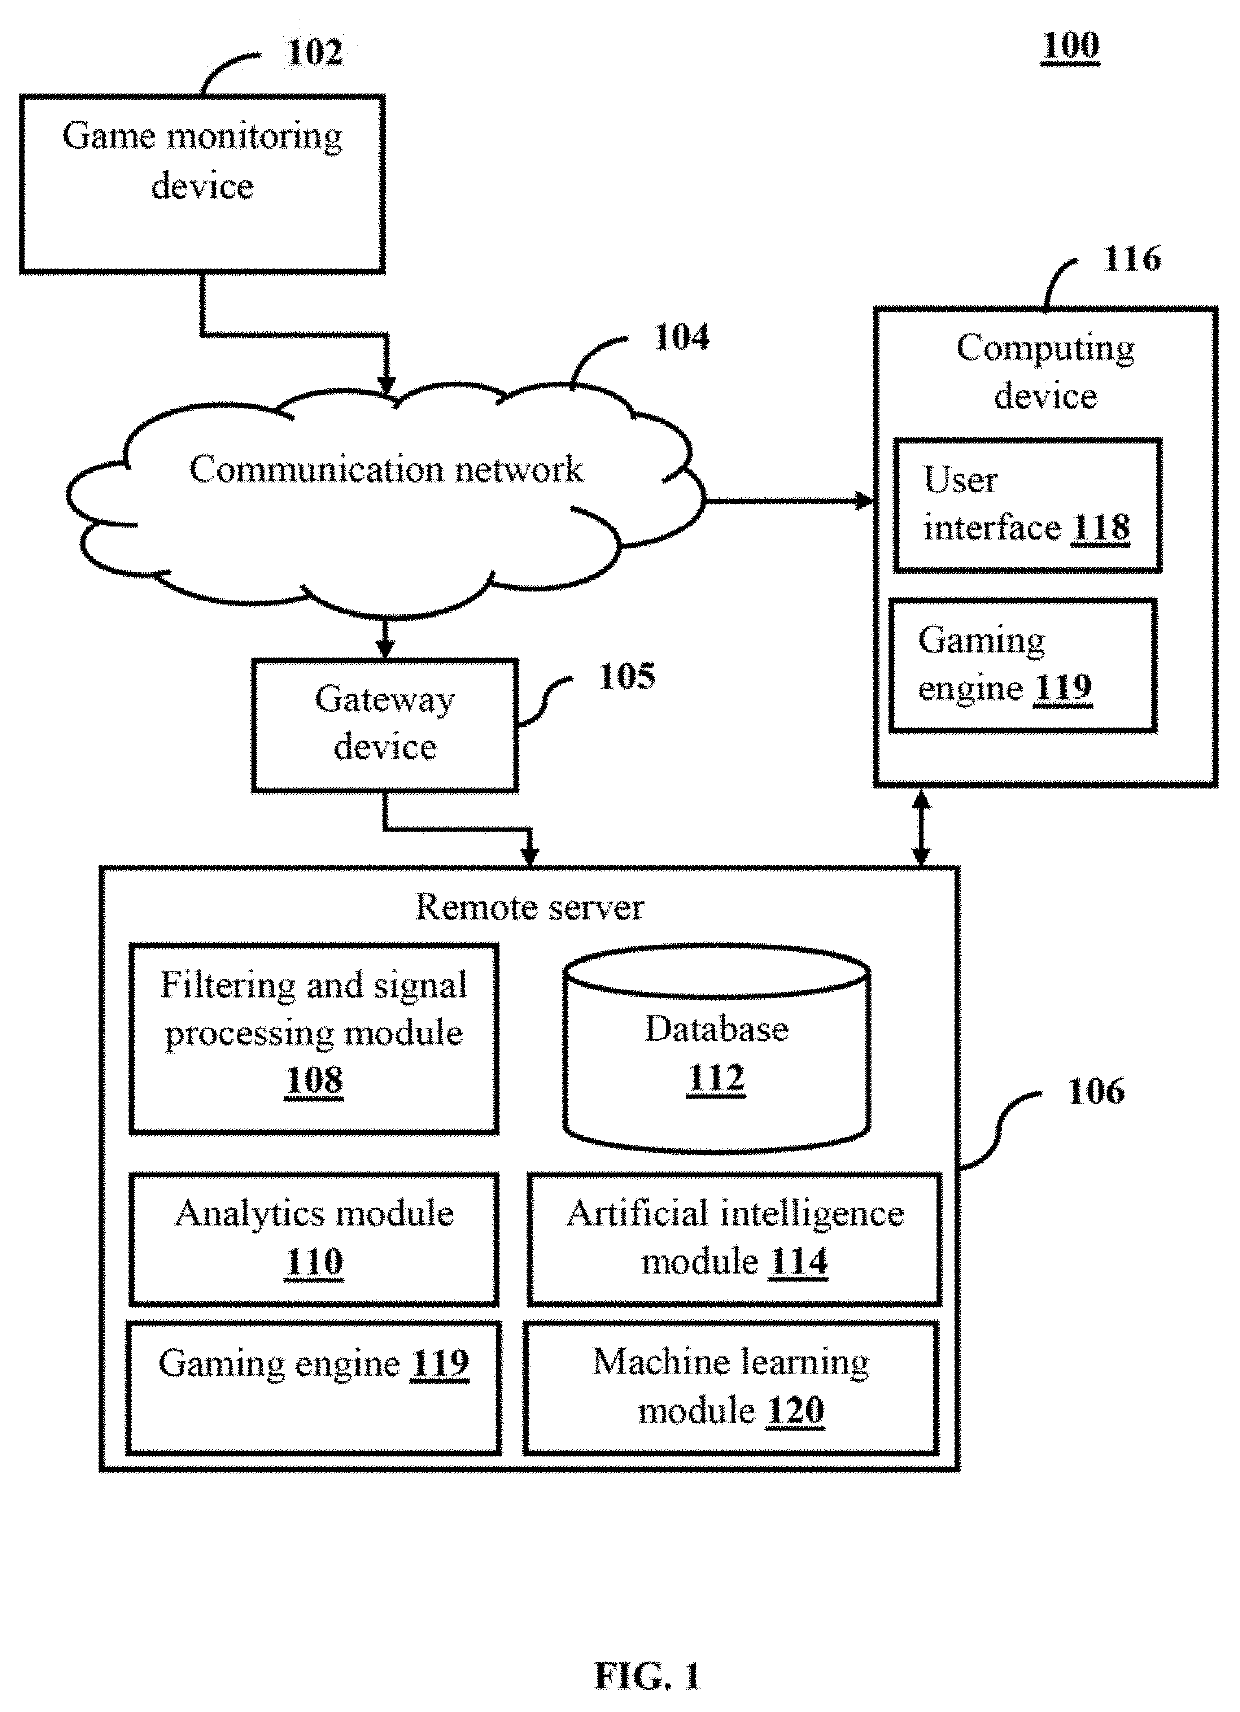 A system and method to analyze and improve sports performance using monitoring devices